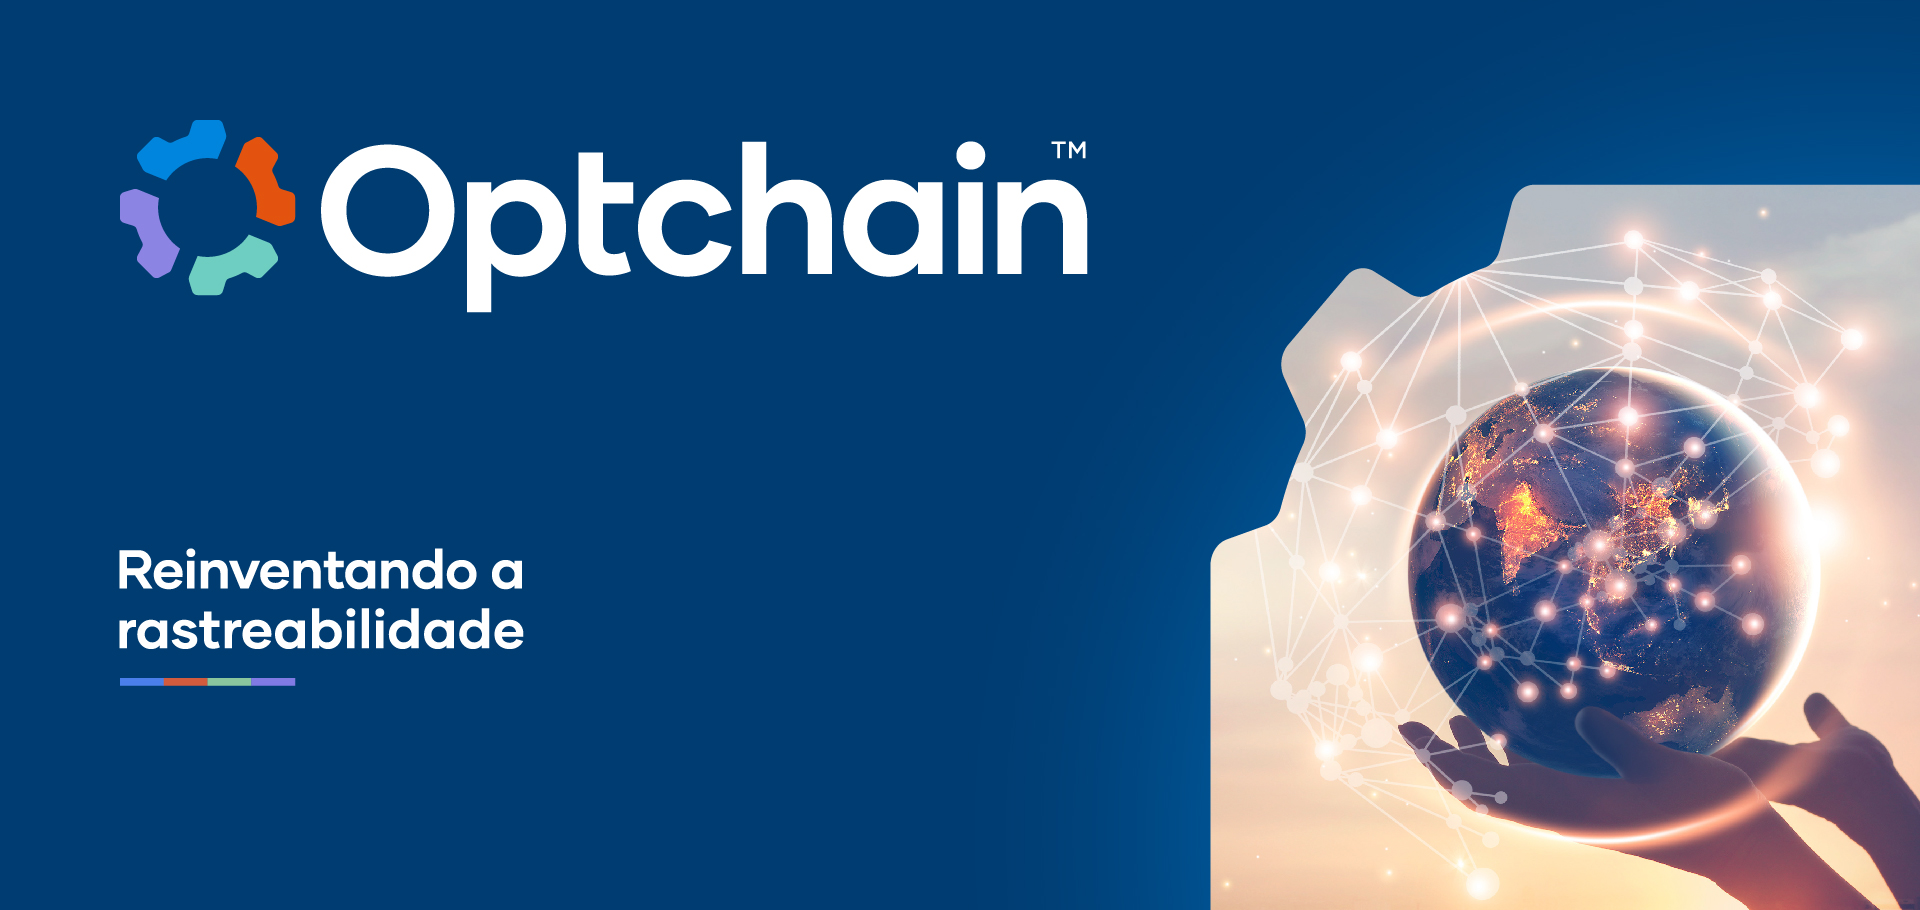 Optchain by OPTEL